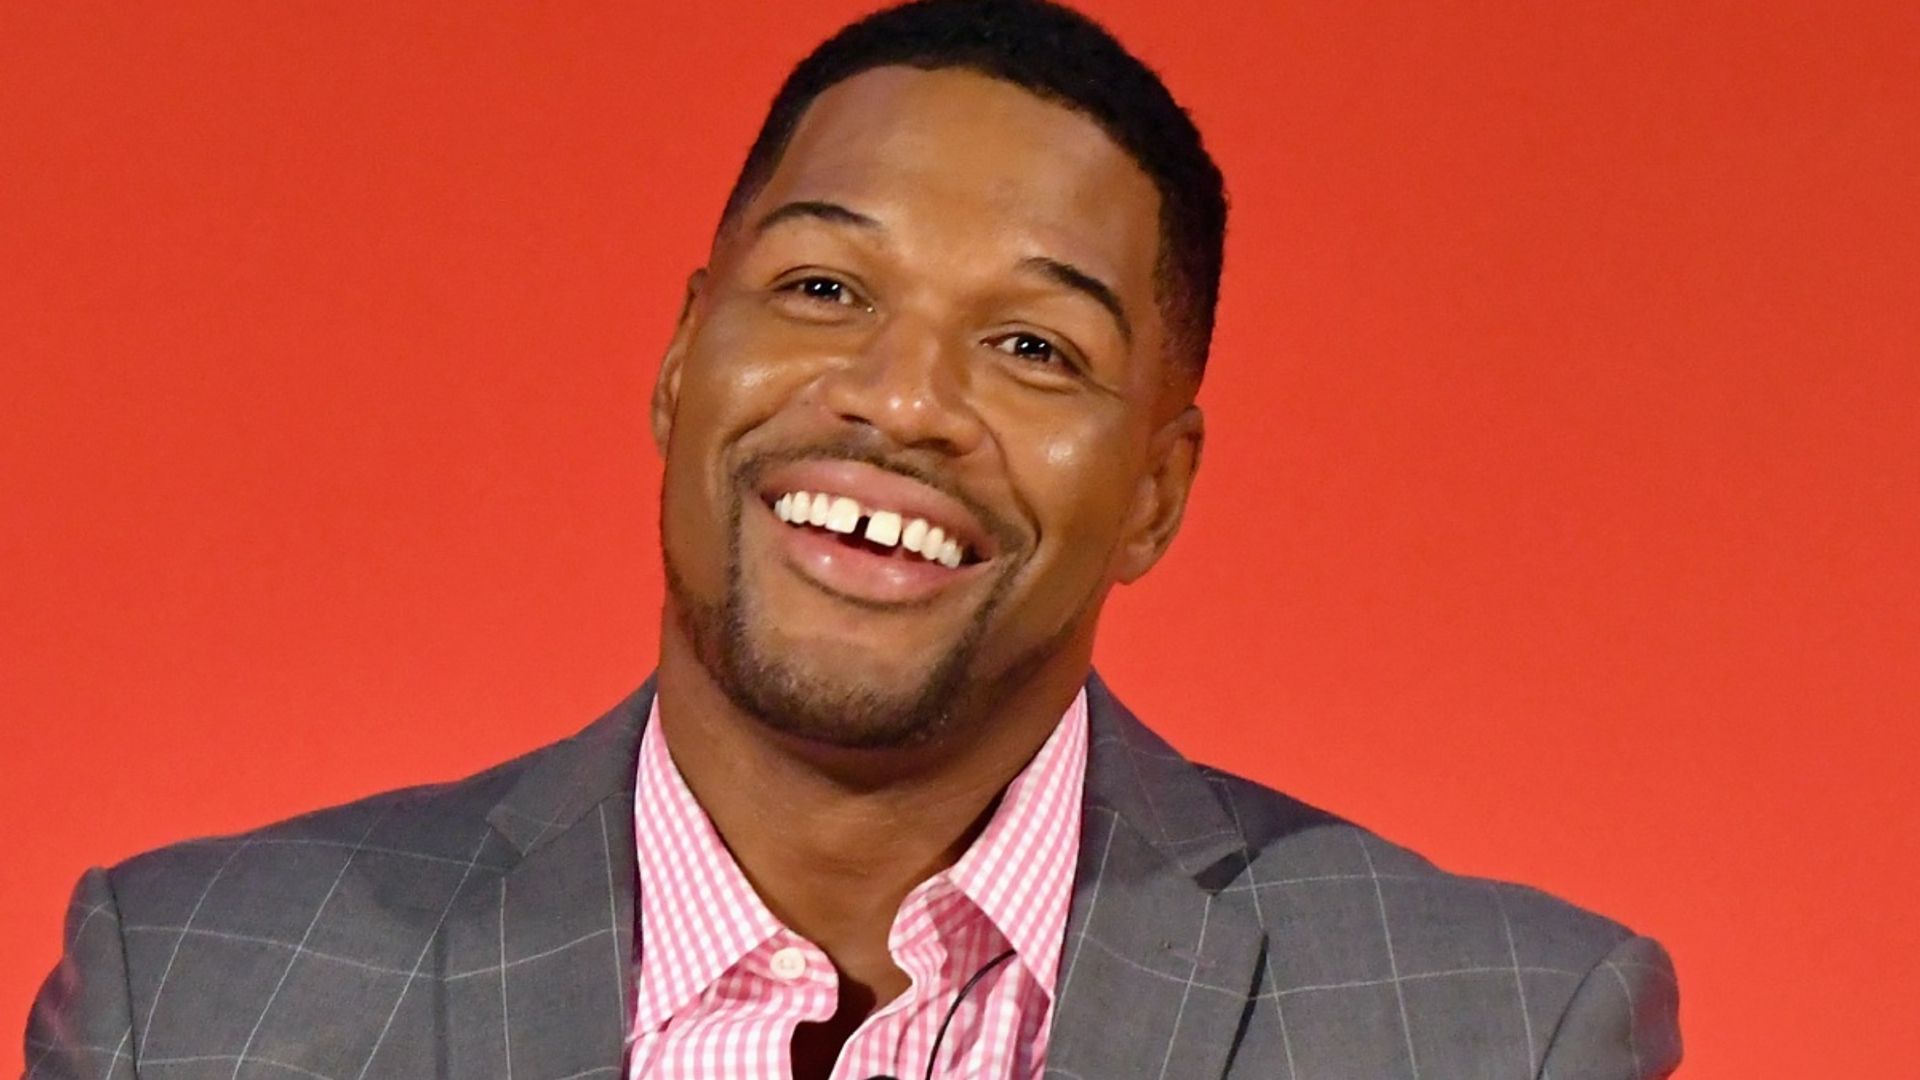 Gmas Michael Strahan Overwhelmed With Love As He Marks Special Day With Co Stars On Show Hello 